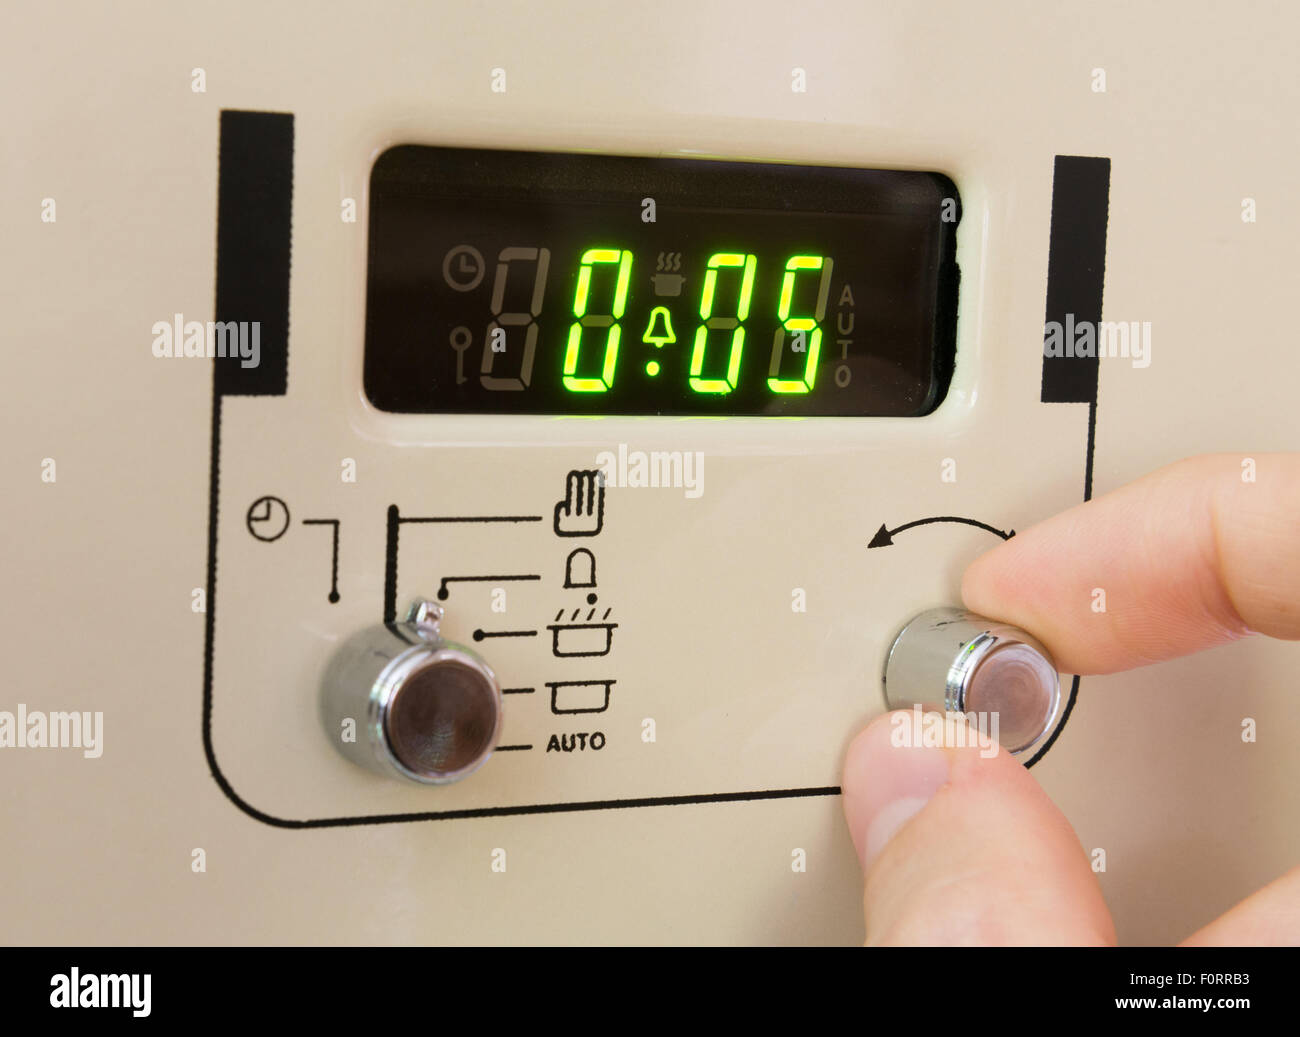 Setting a cooker timer to 5 minutes Stock Photo